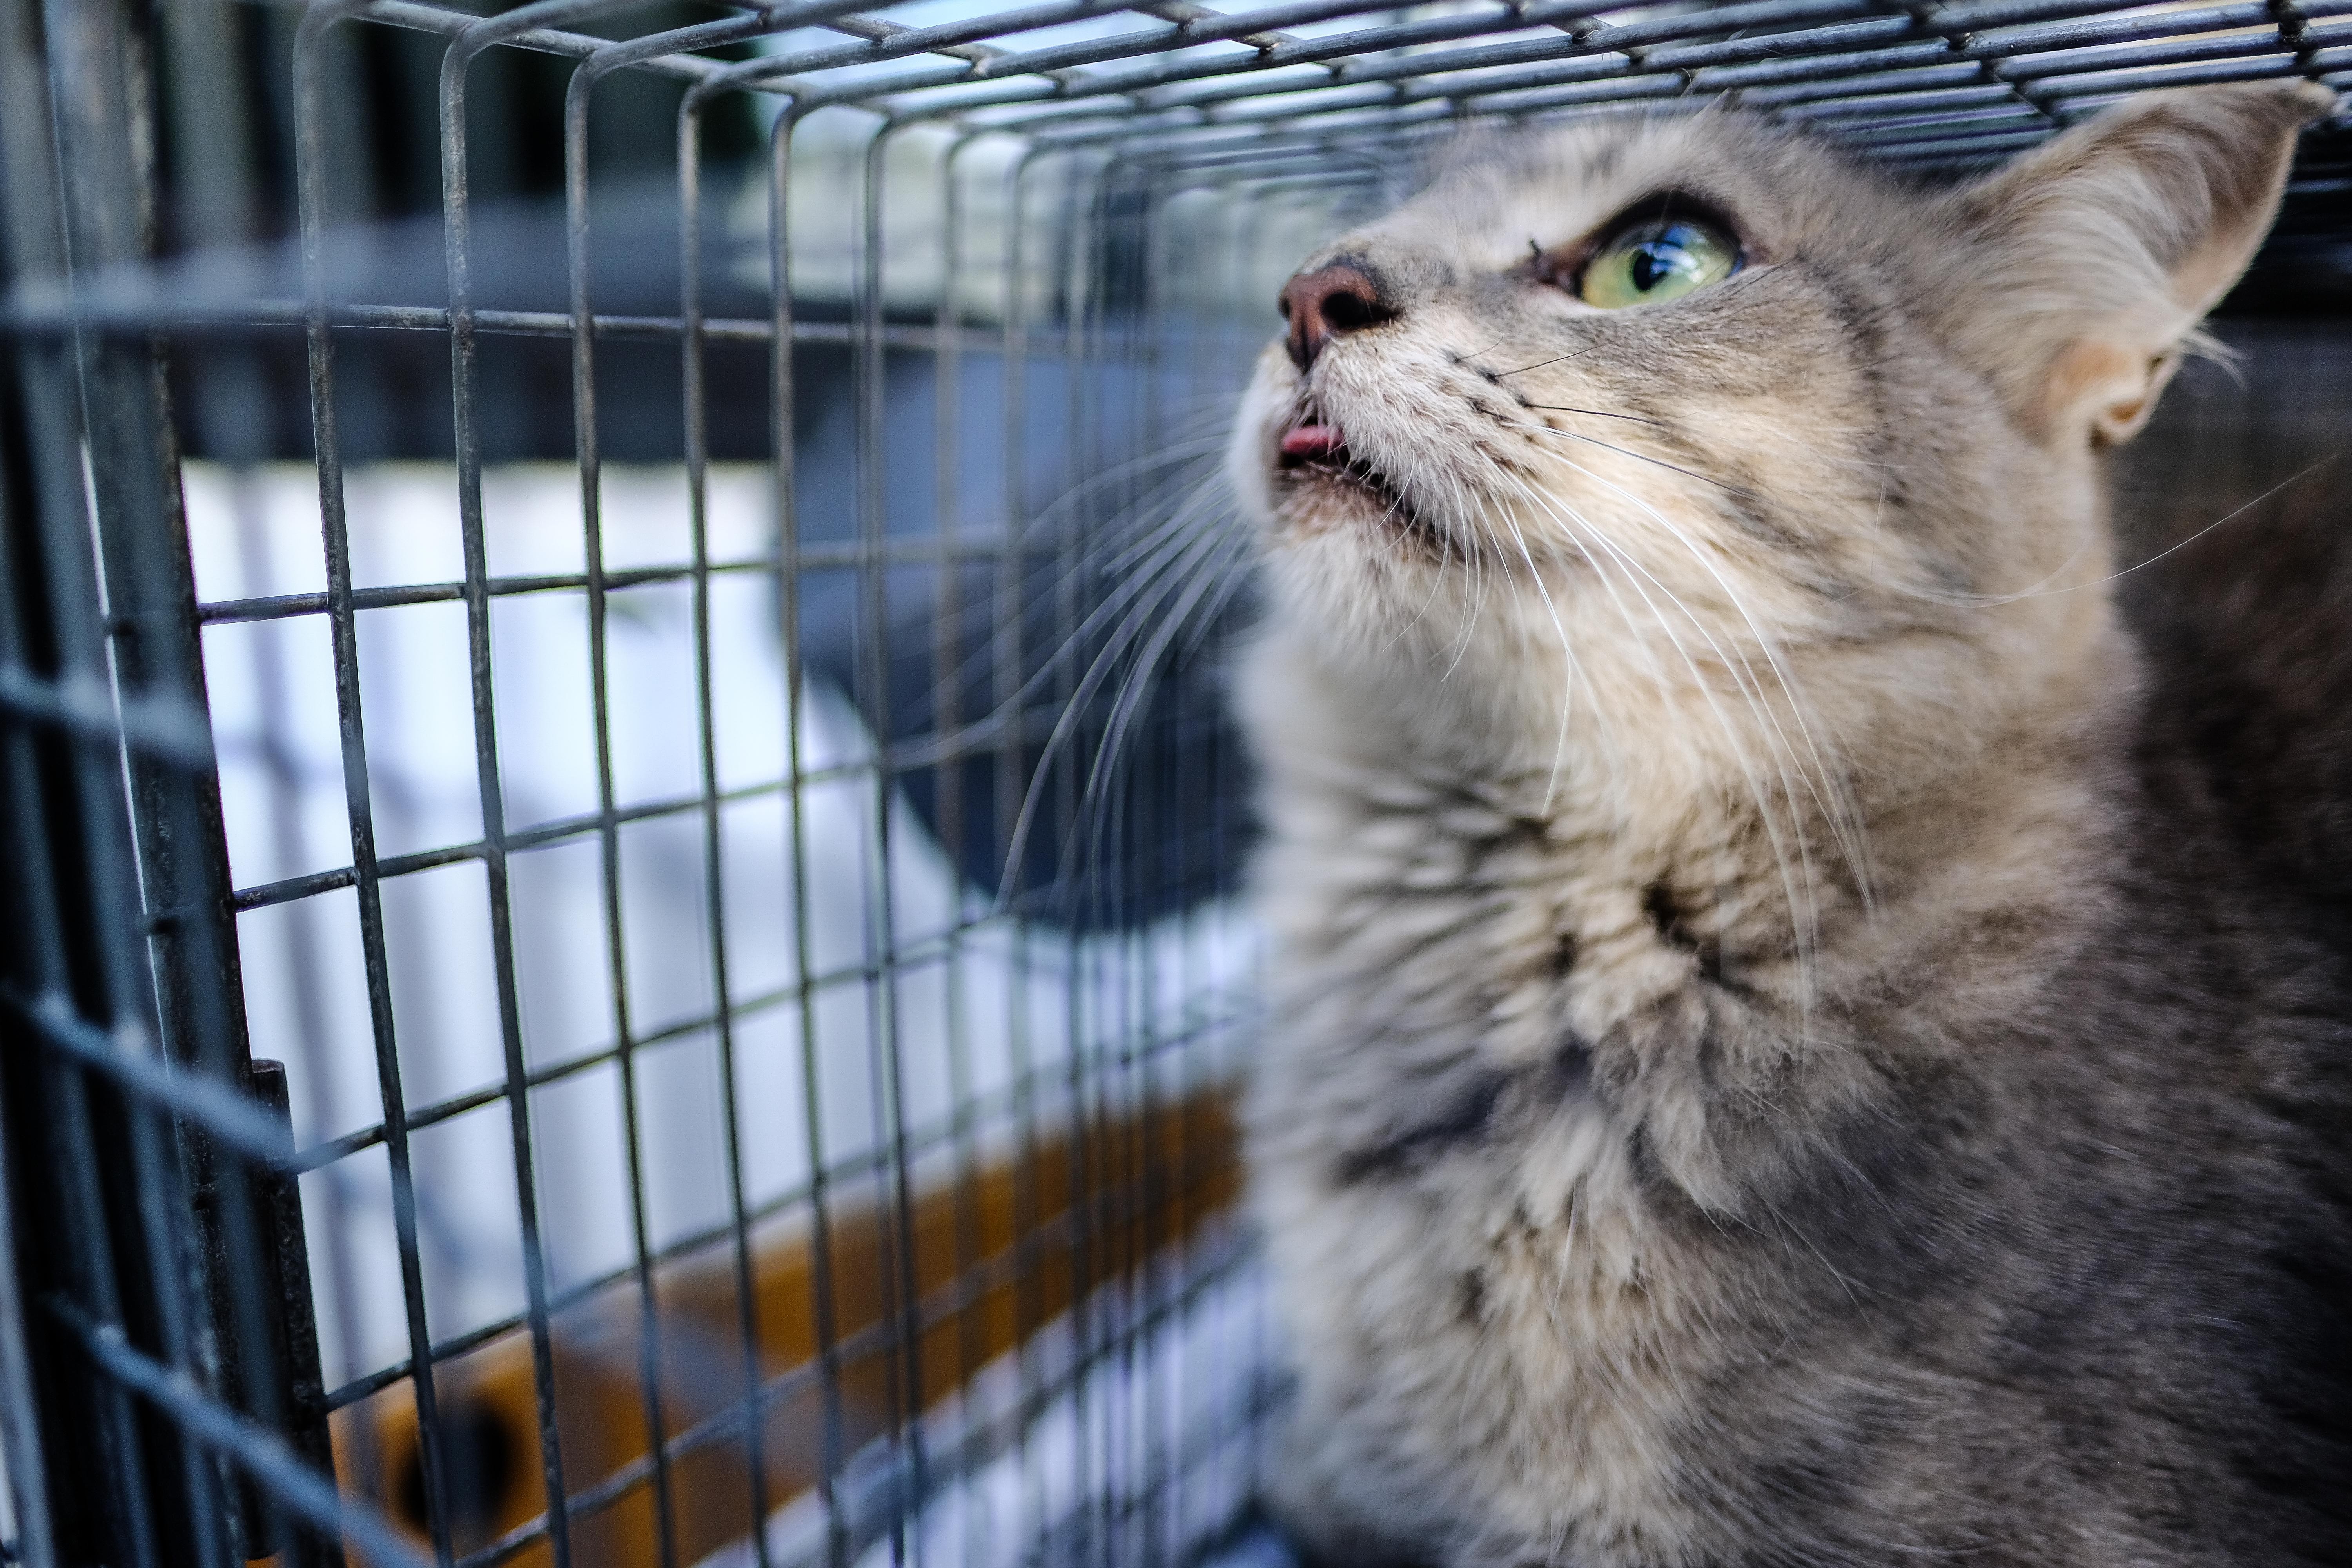 A captured cat en route to get neutered. - photo by Kathryn Harrington